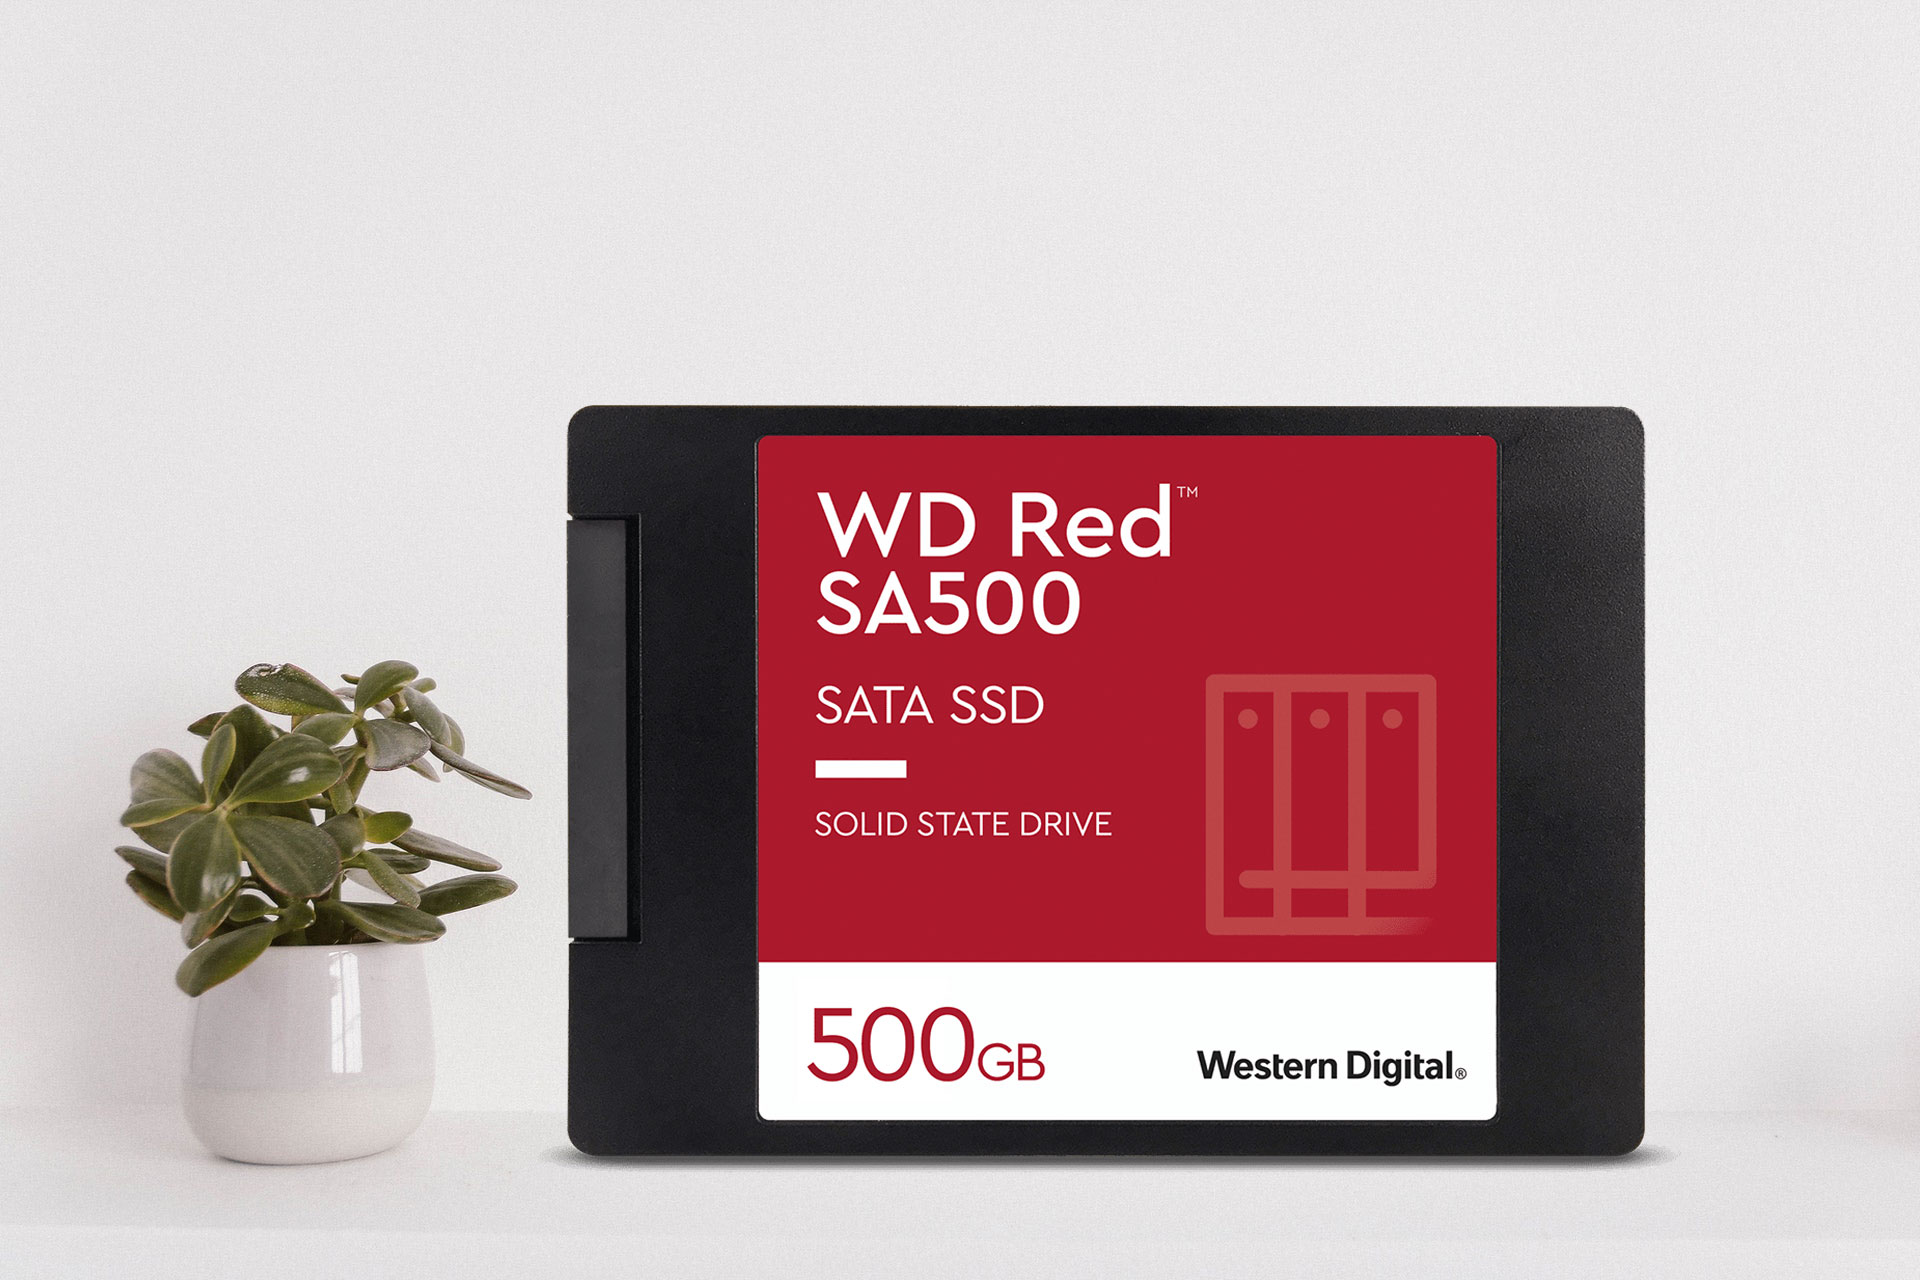 WD RED NAS SSD